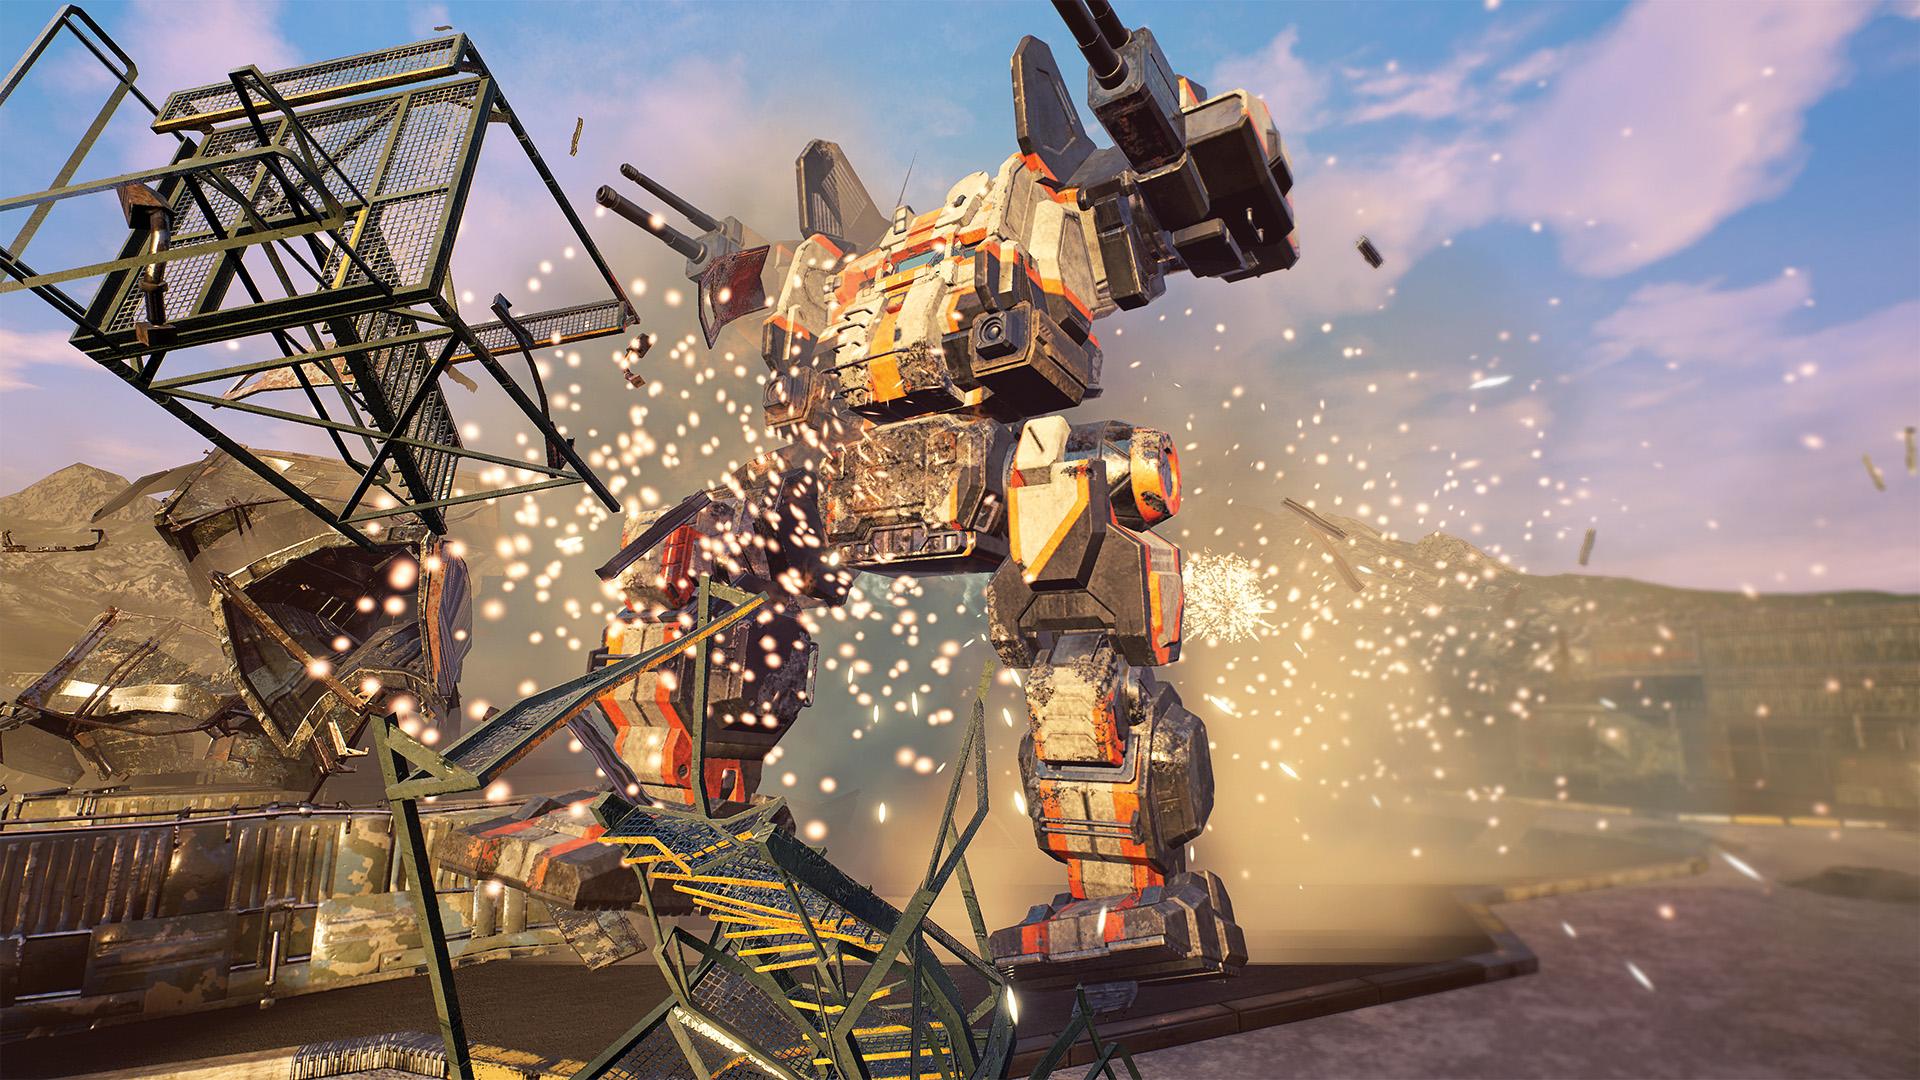 MechWarrior 5: Mercenaries is delayed, will be an Epic Games Store